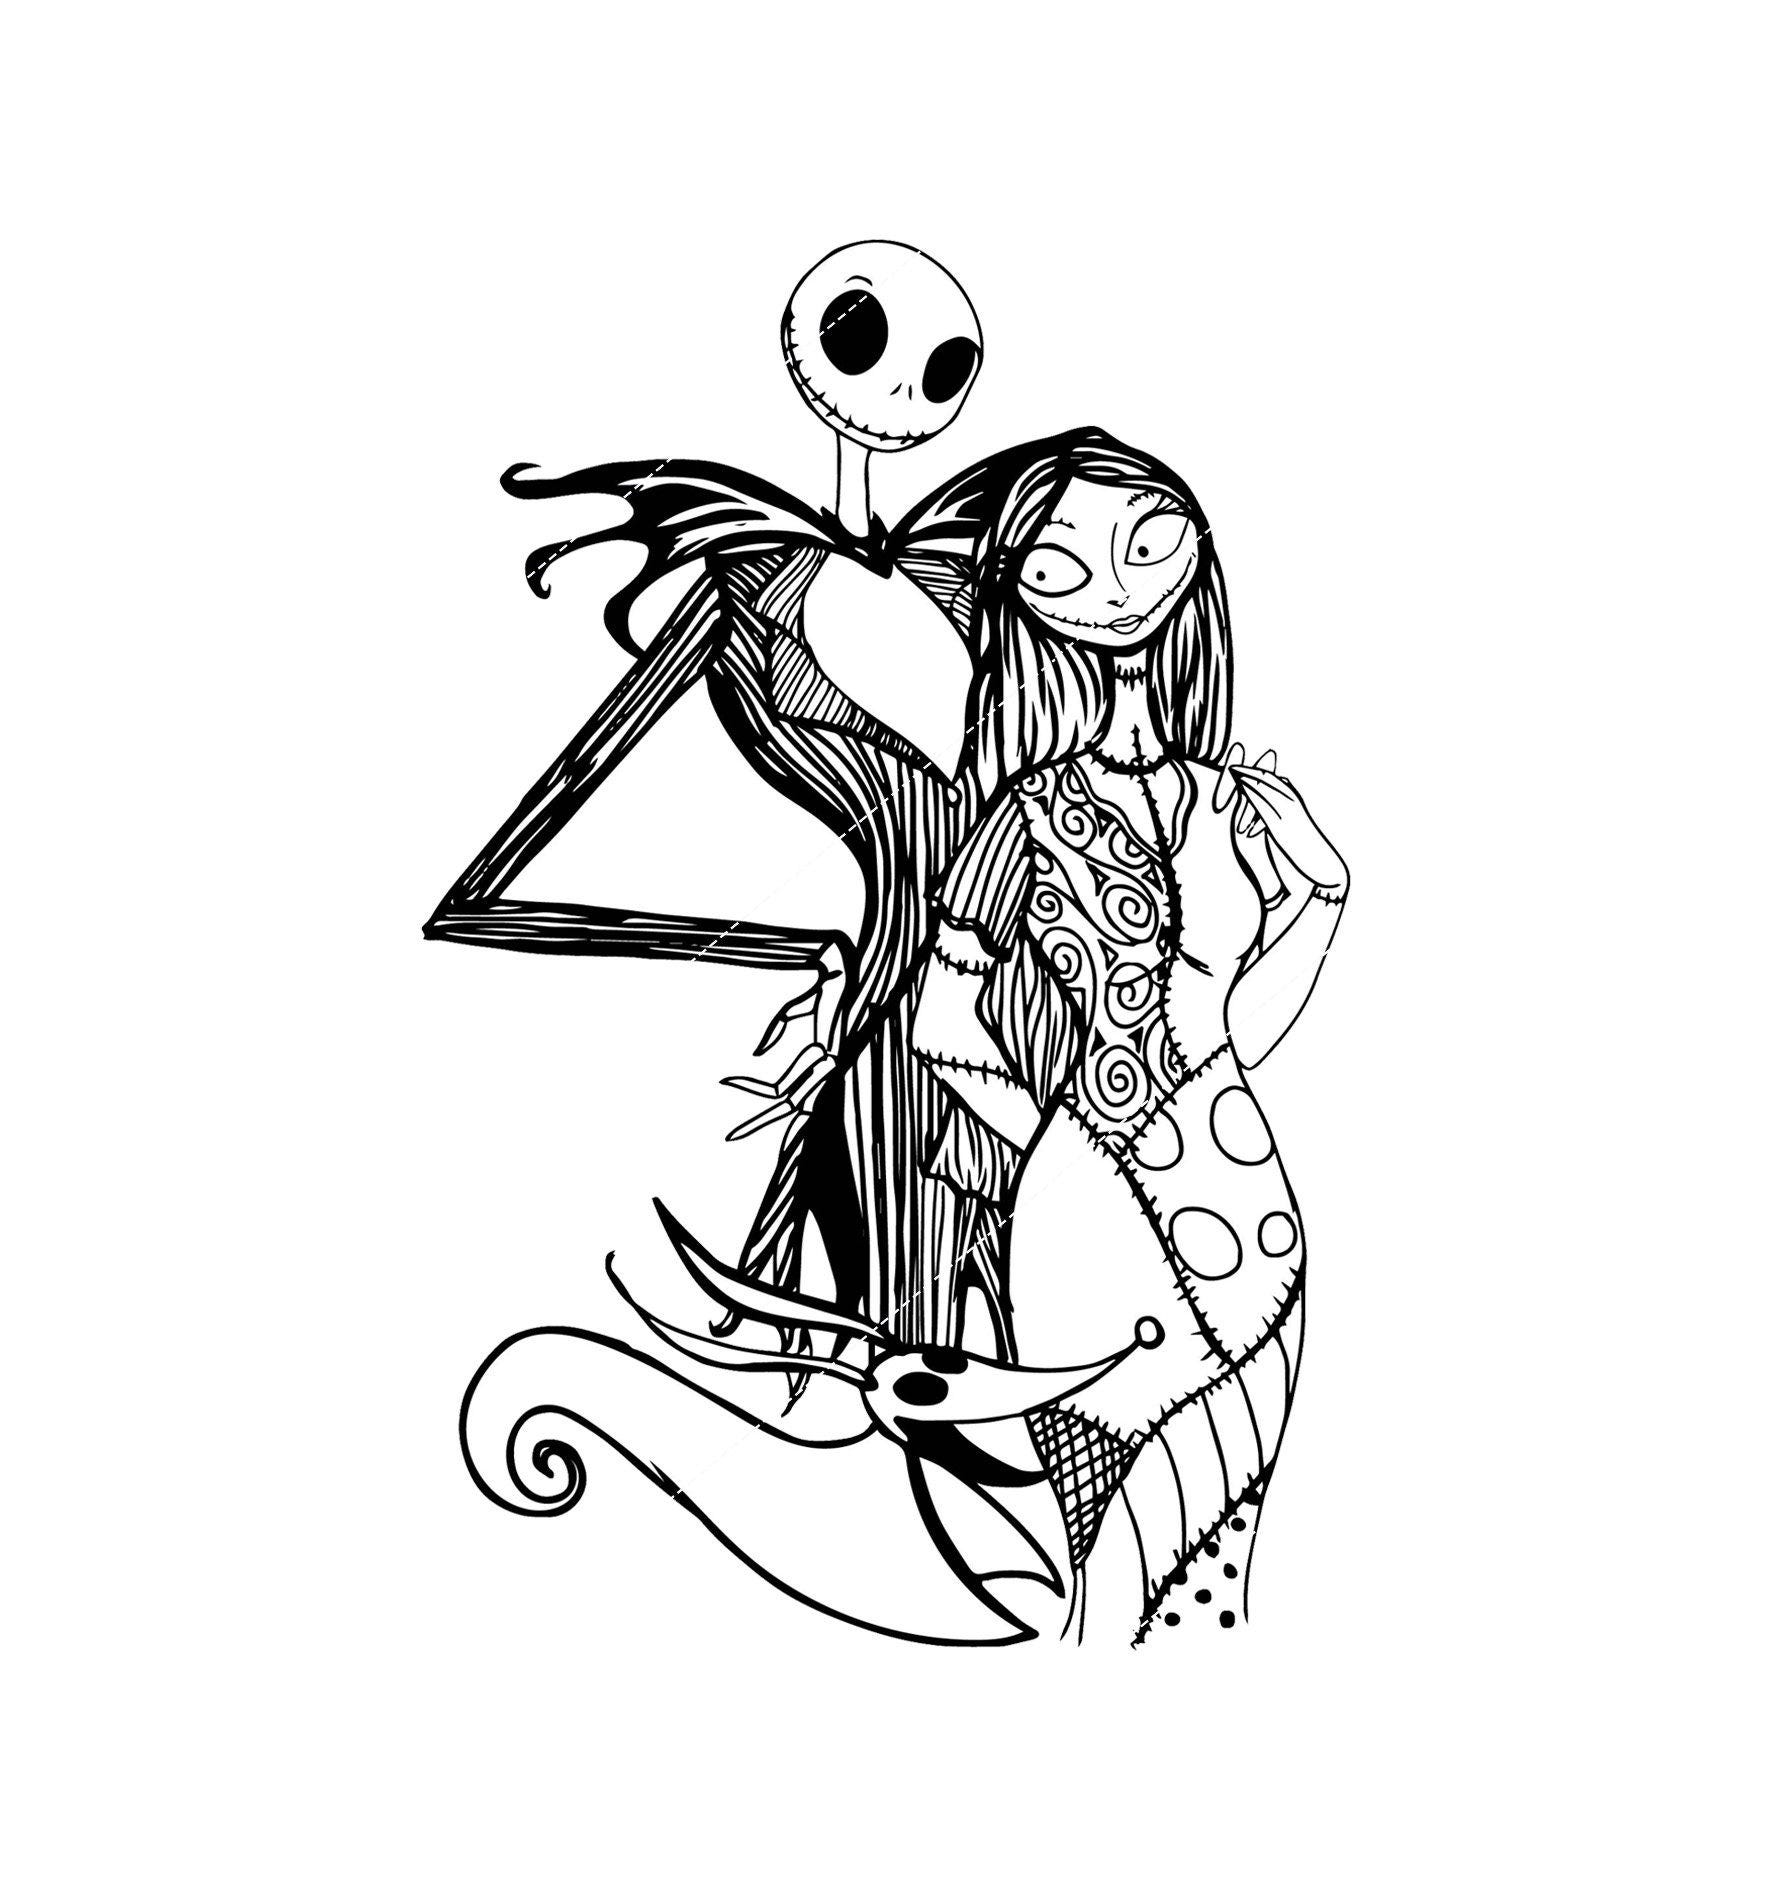 Jack And Sally In Heart SVG, Couple Jack And Sally SVG, The Nightmare Before SVG, Halloween Svg